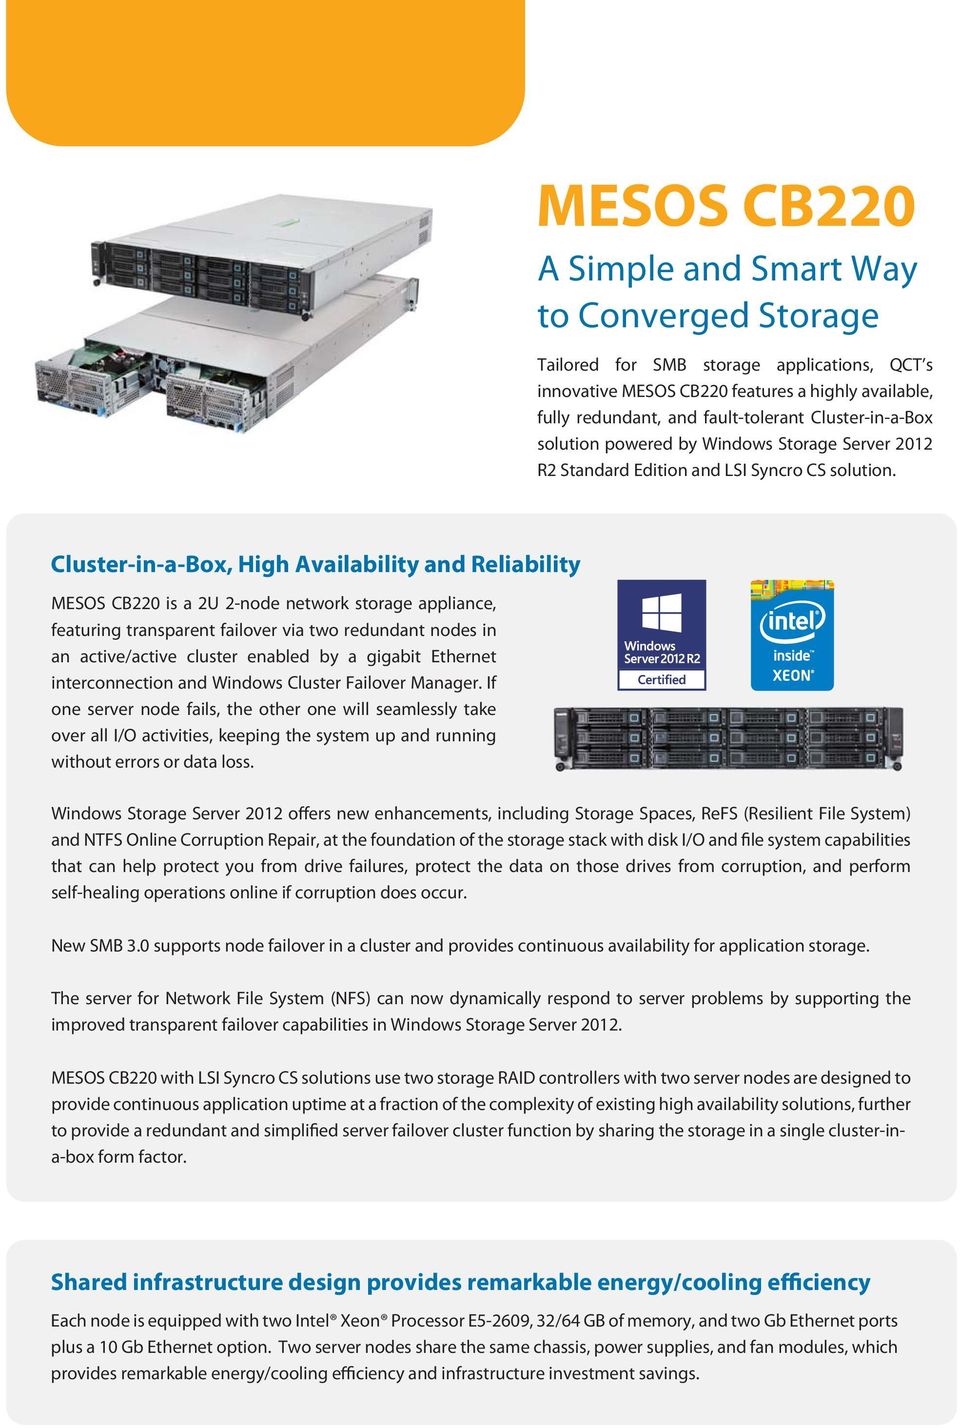 Cluster-in-a-Box, High Availability and Reliability MESOS CB220 is a 2U 2-node network storage appliance, featuring transparent failover via two redundant nodes in an active/active cluster enabled by